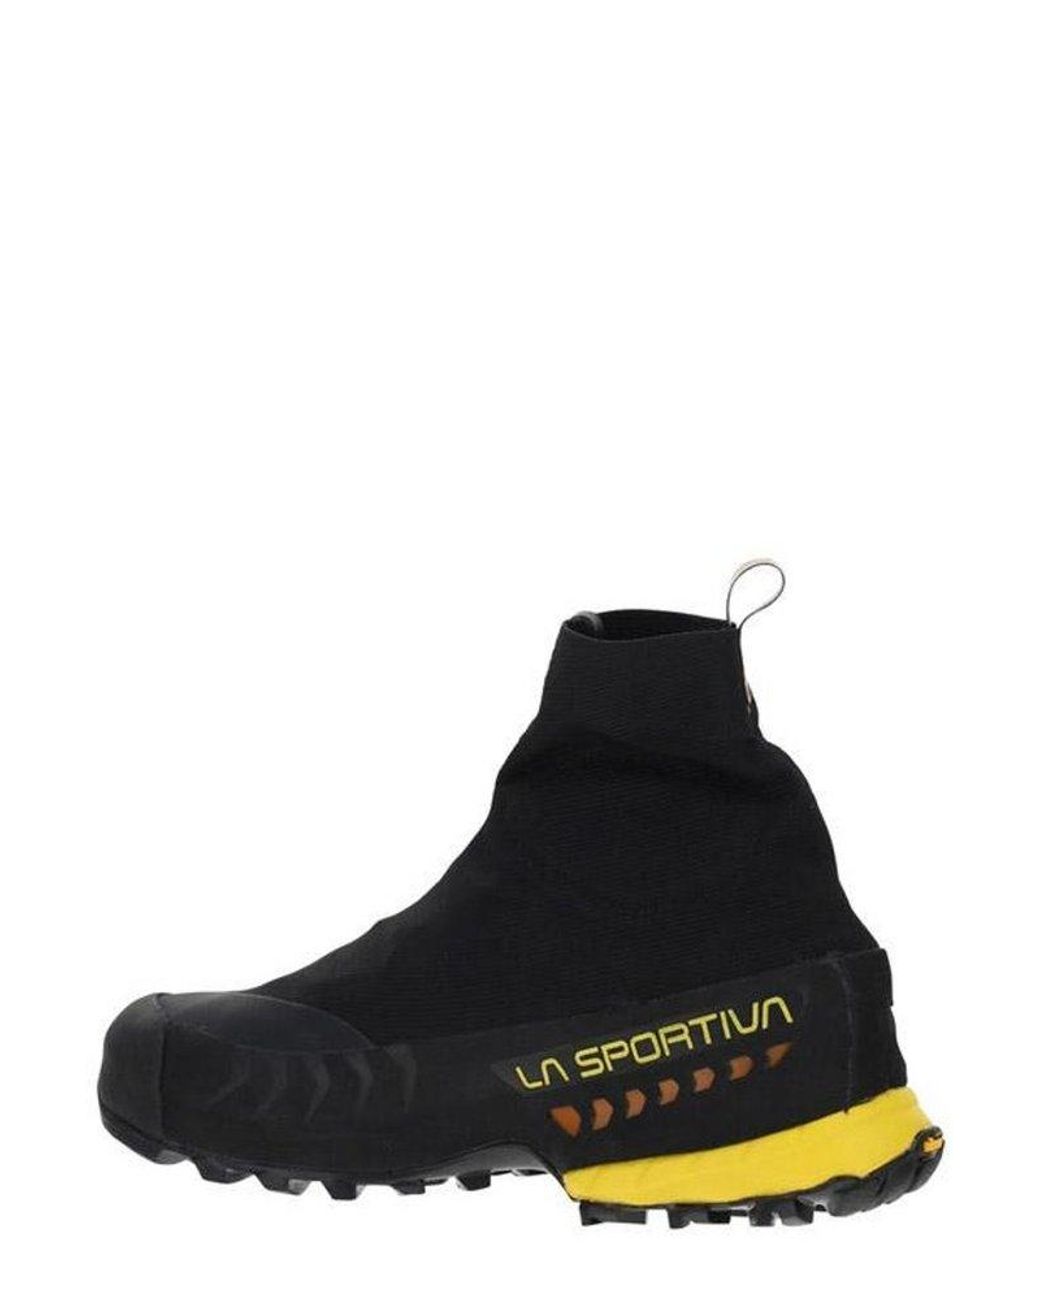 Zegna X La Sportiva High-top Hiking Boots in Black for Men | Lyst